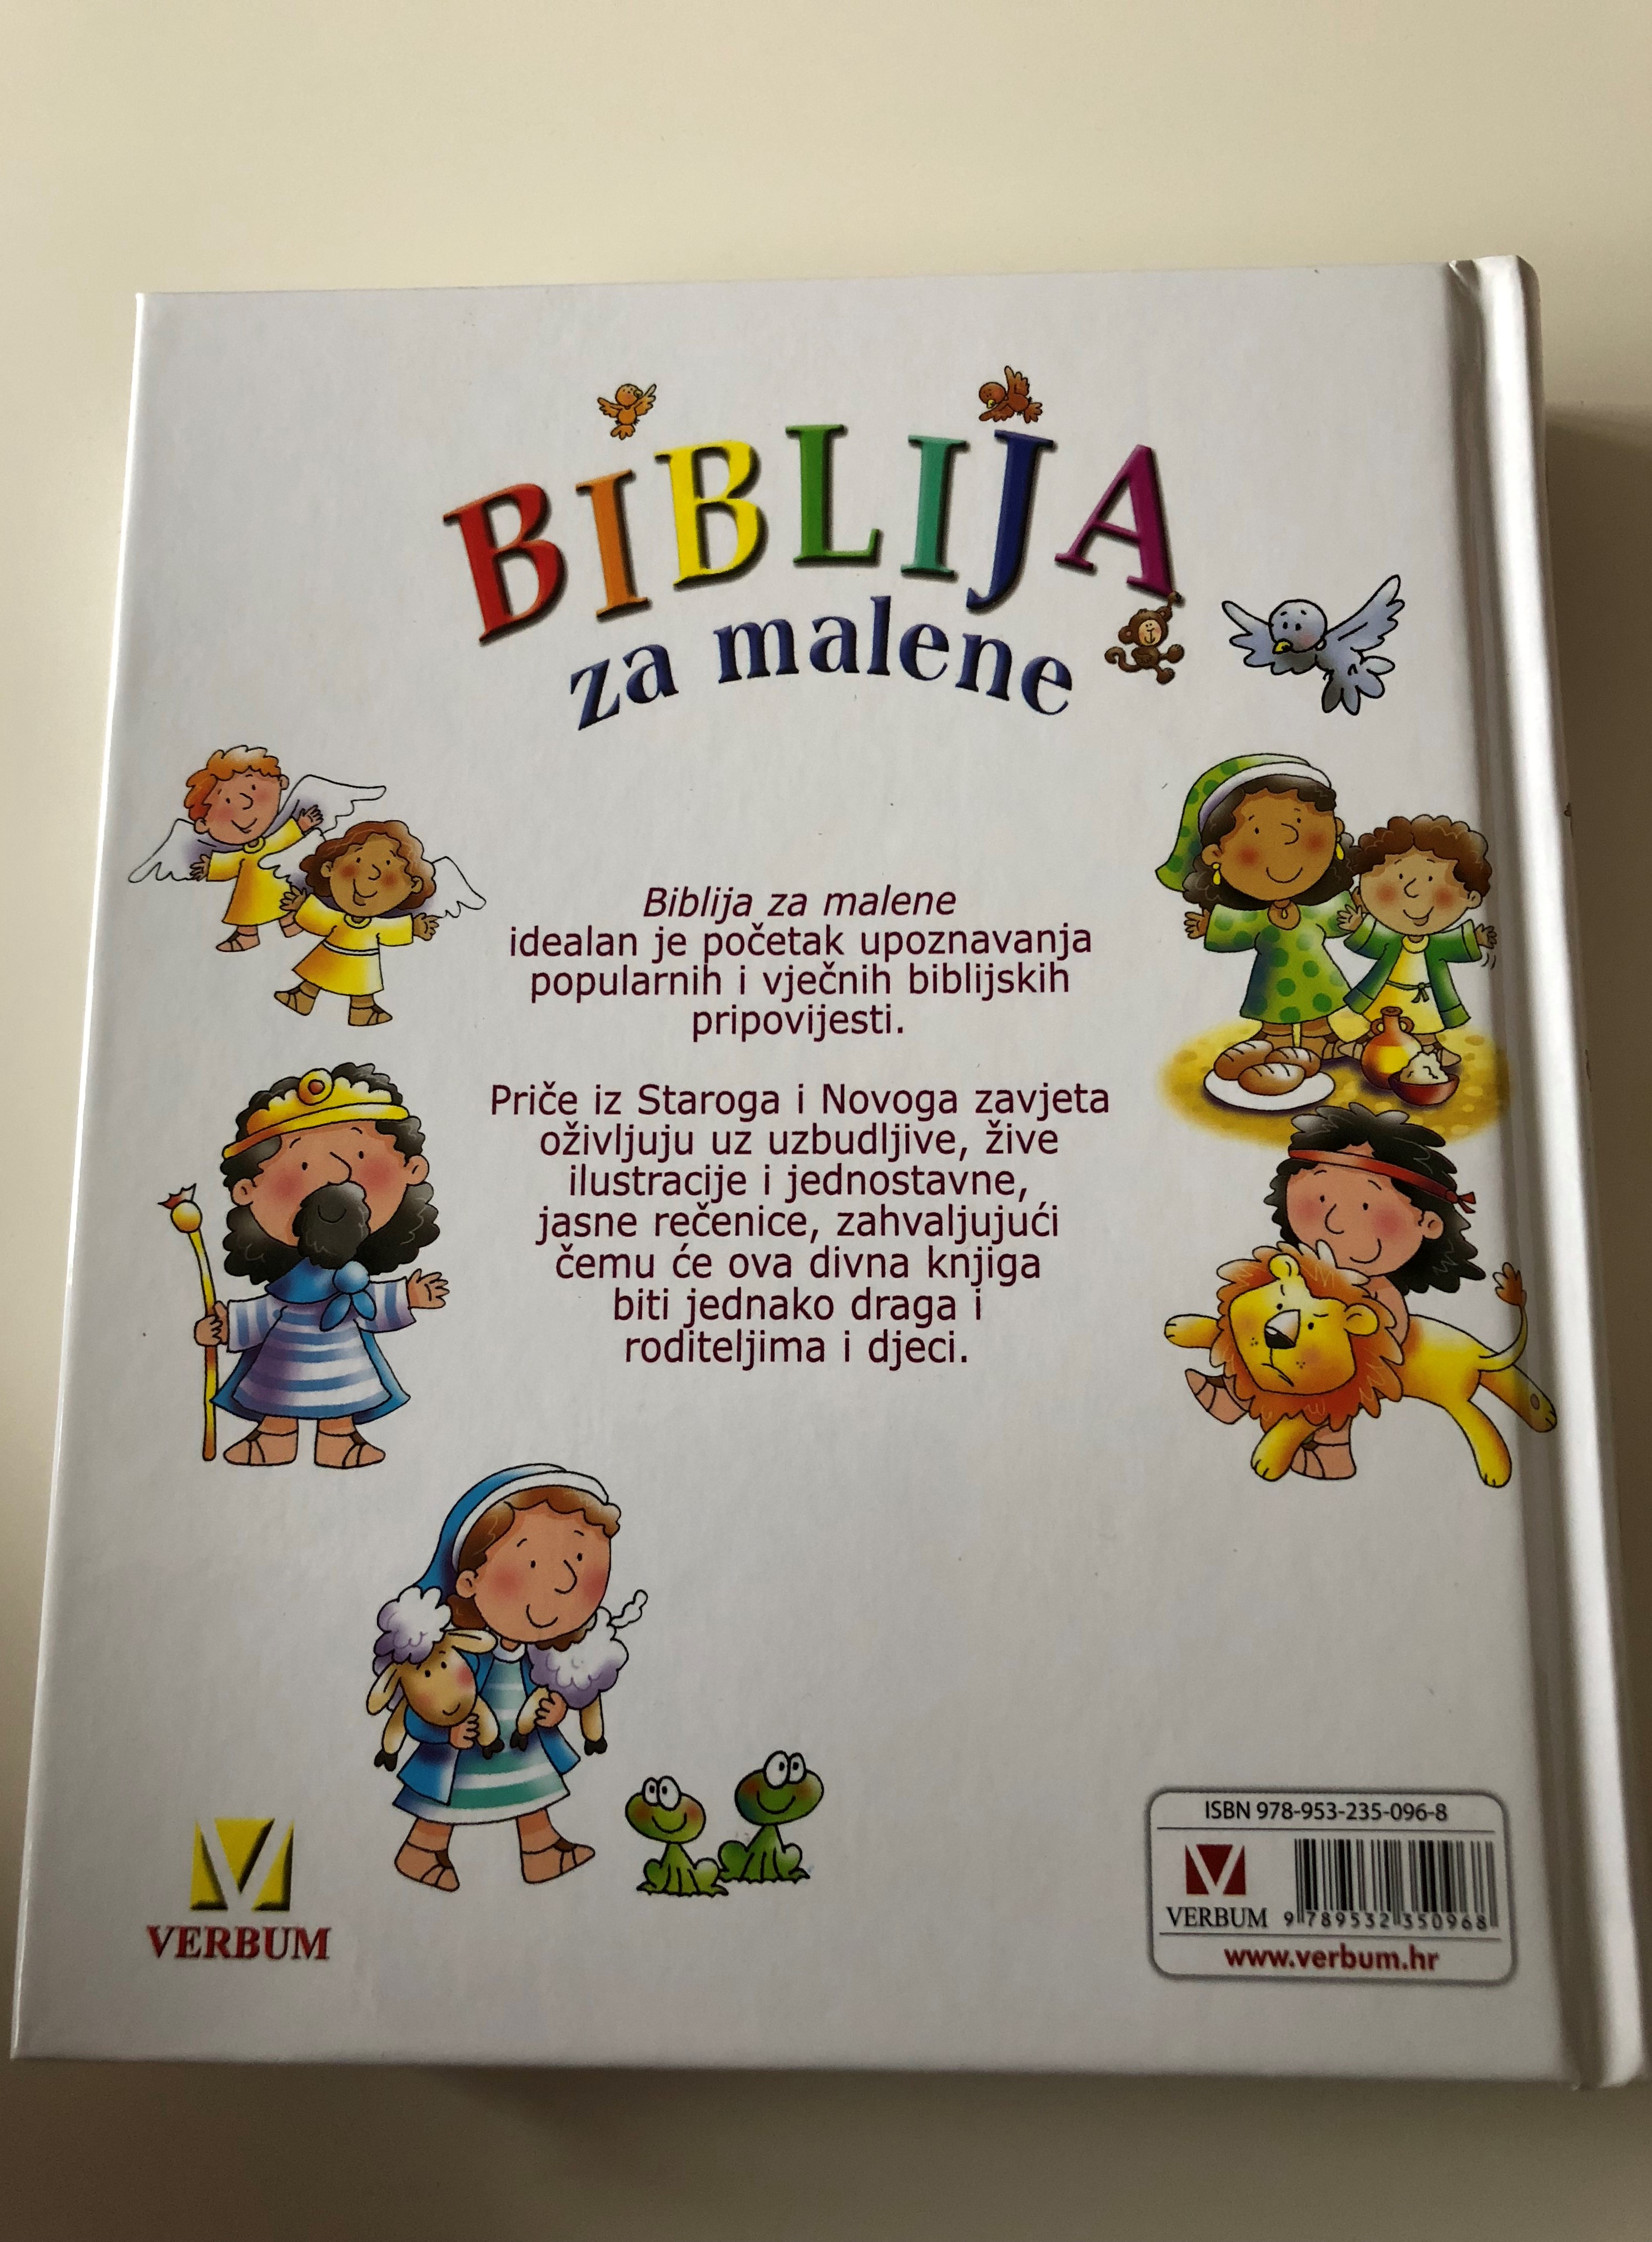 croatian-bible-for-little-ones-color-illustrated-childrens-bible-3-.jpg